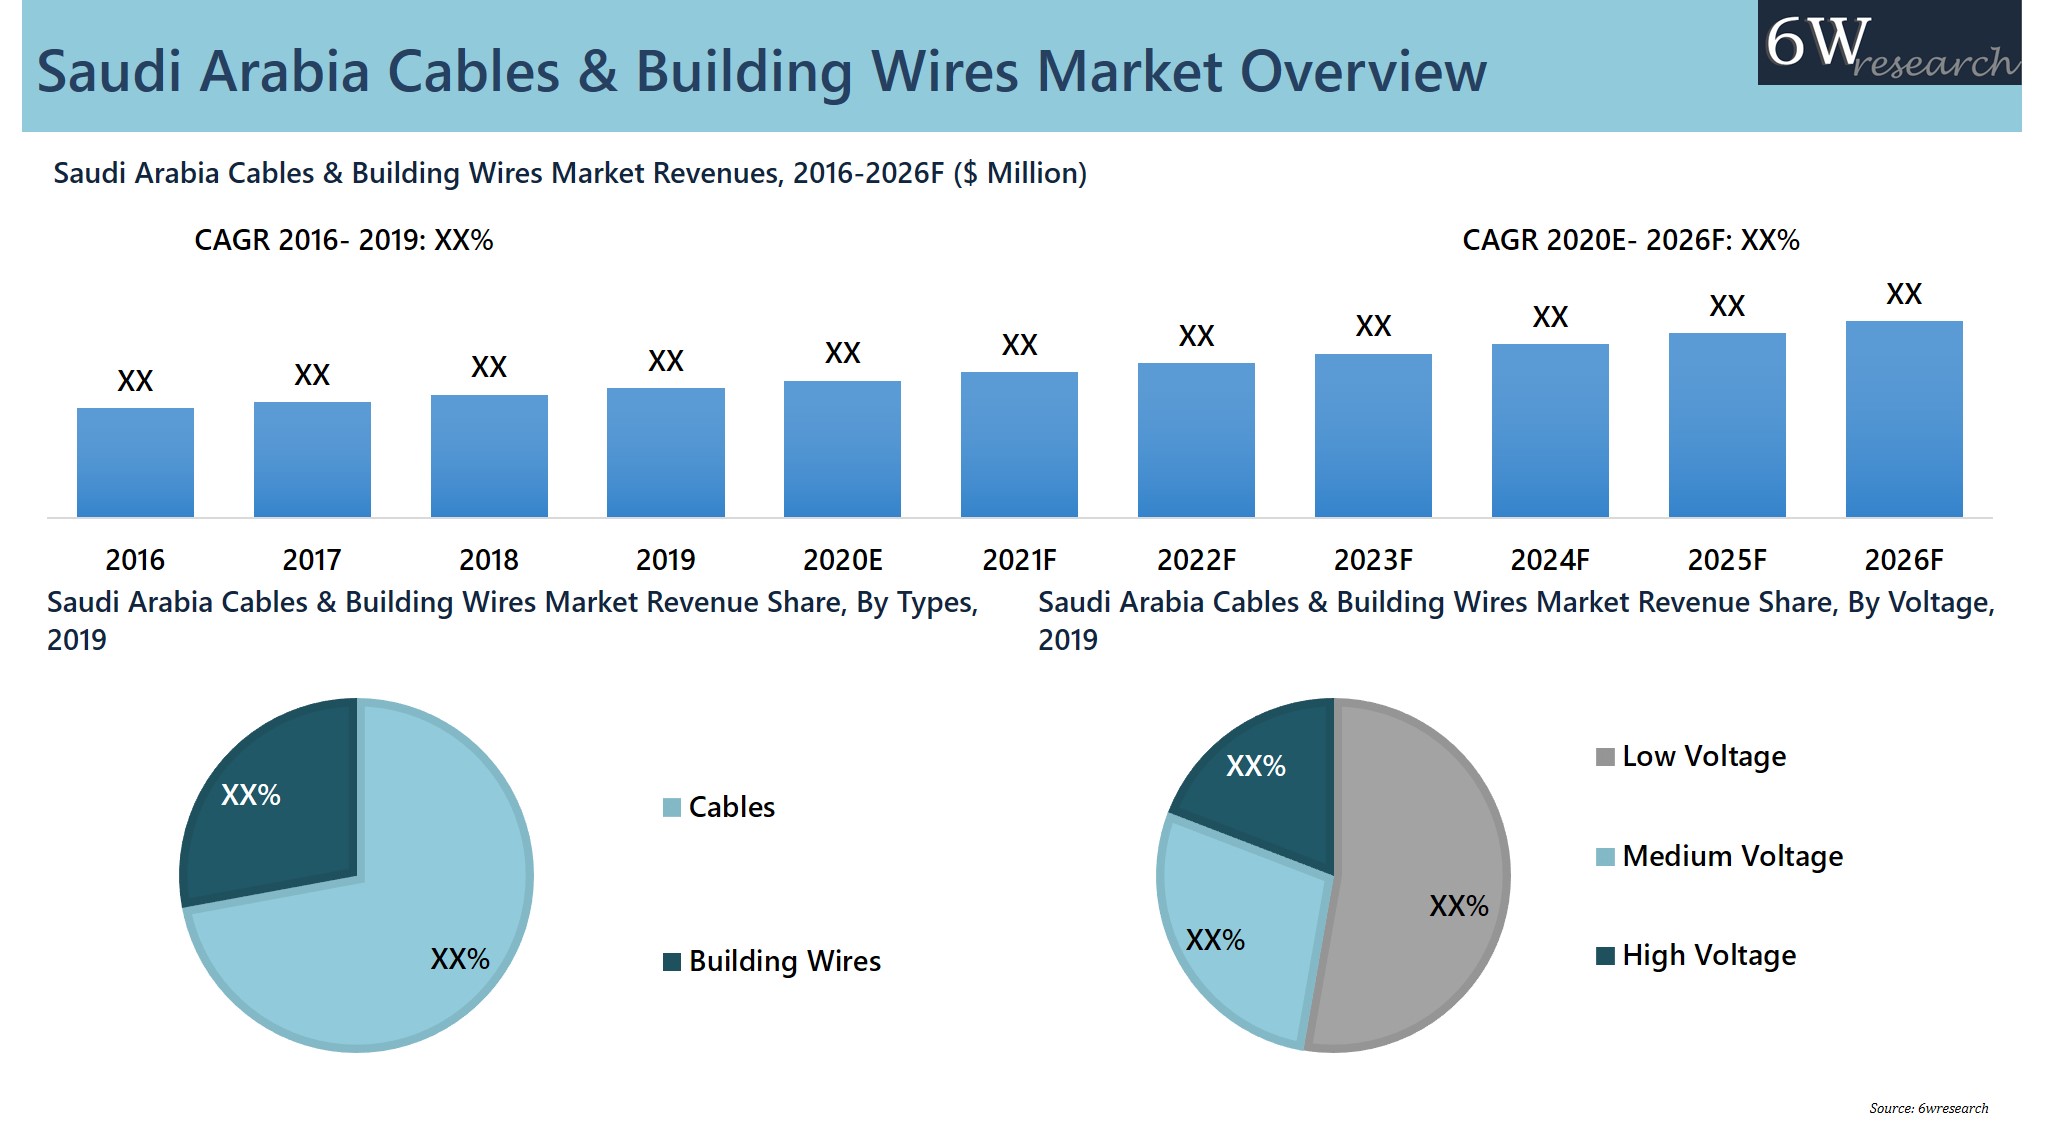  Saudi Arabia Cables and Building Wires Market